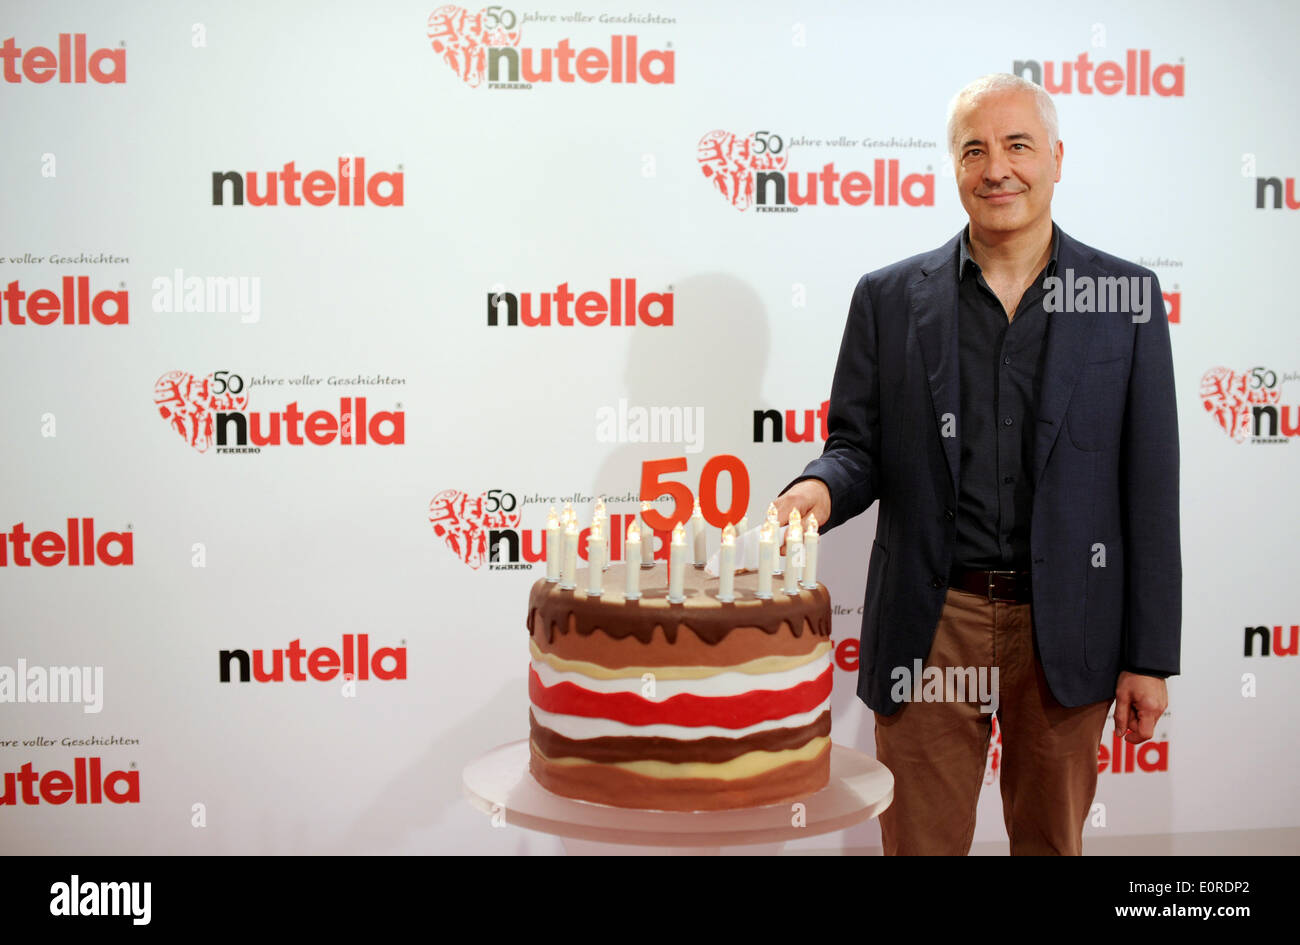 Dortmund, Germany. 18th May, 2014. Carlo Vassallo, CEO of Ferrero Germany, cuts into a birthday cake for the 50th birthday of Nutella at Westfalenpark in Dortmund, Germany, 18 May 2014. The Nutella from the Ferrero brand is celebrating the 50th anniversary with a family party and celebrity birthday sponsors. Photo: JONAS GUETTLER/dpa/Alamy Live News Stock Photo